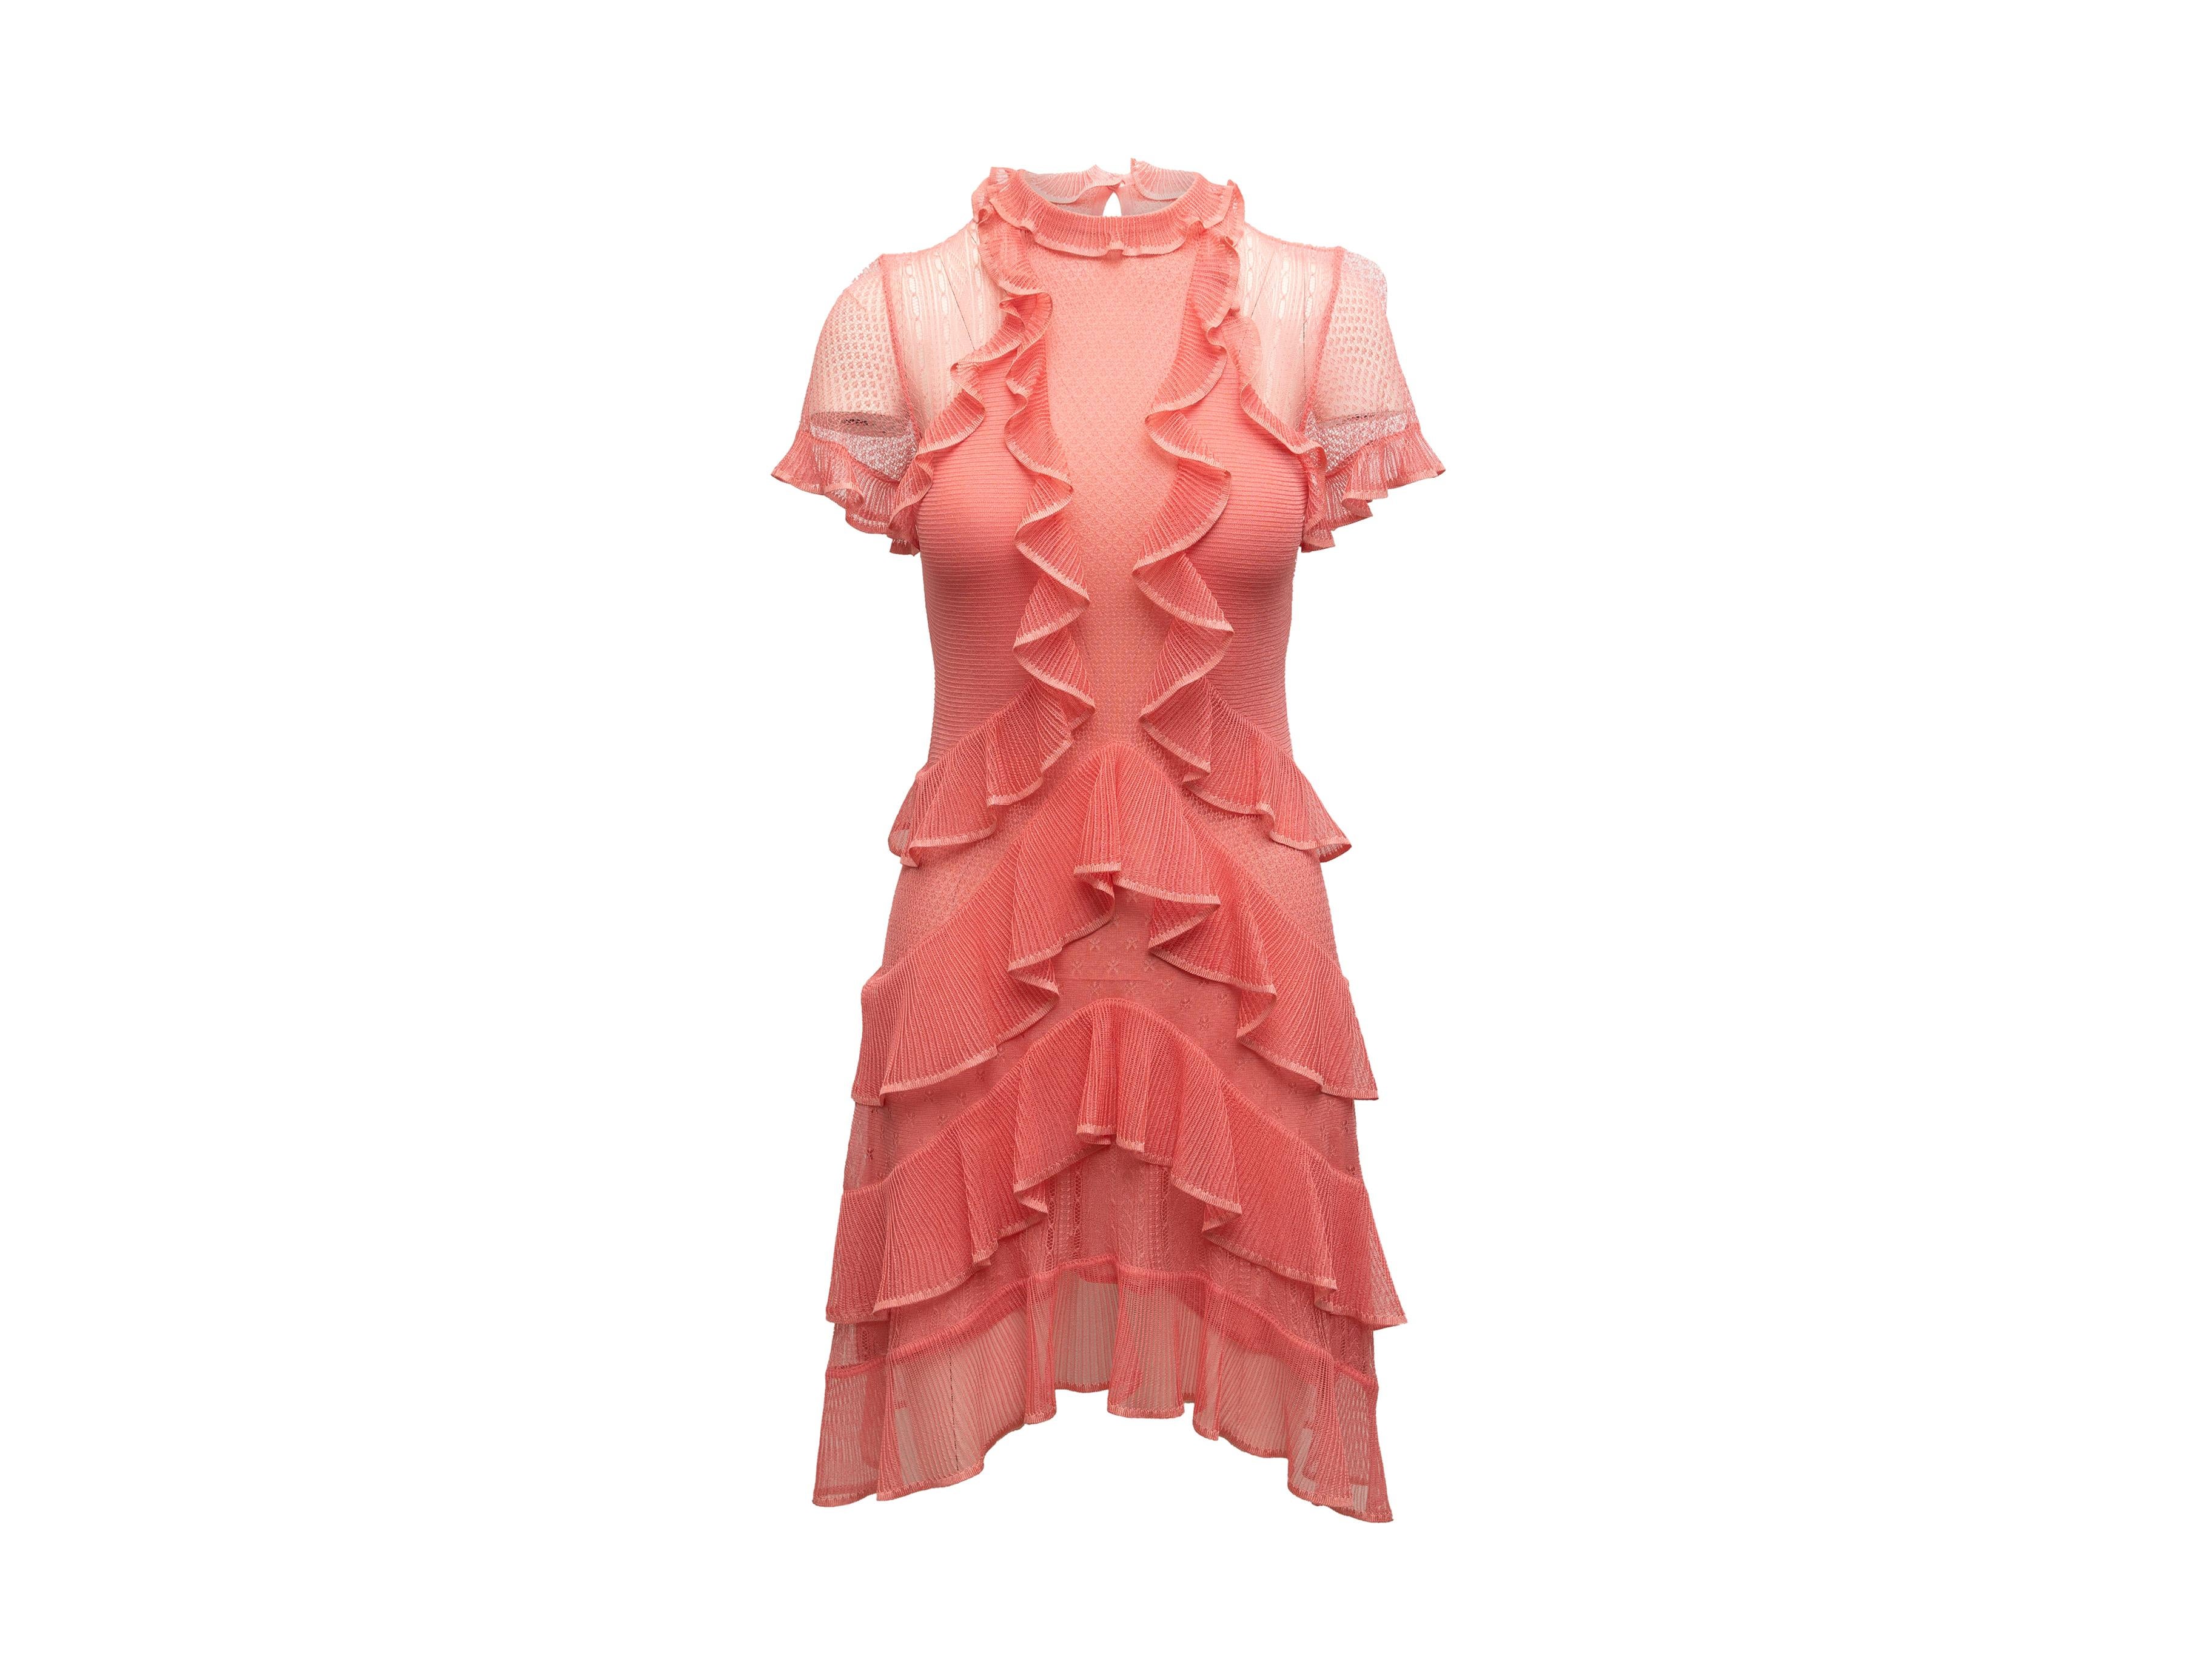 Product details: Pink silk knit short sleeve dress by Alexander McQueen. Ruffle detailing throughout. Crew neck. Asymmetrical hem. Keyhole at nape featuring button closure. 27